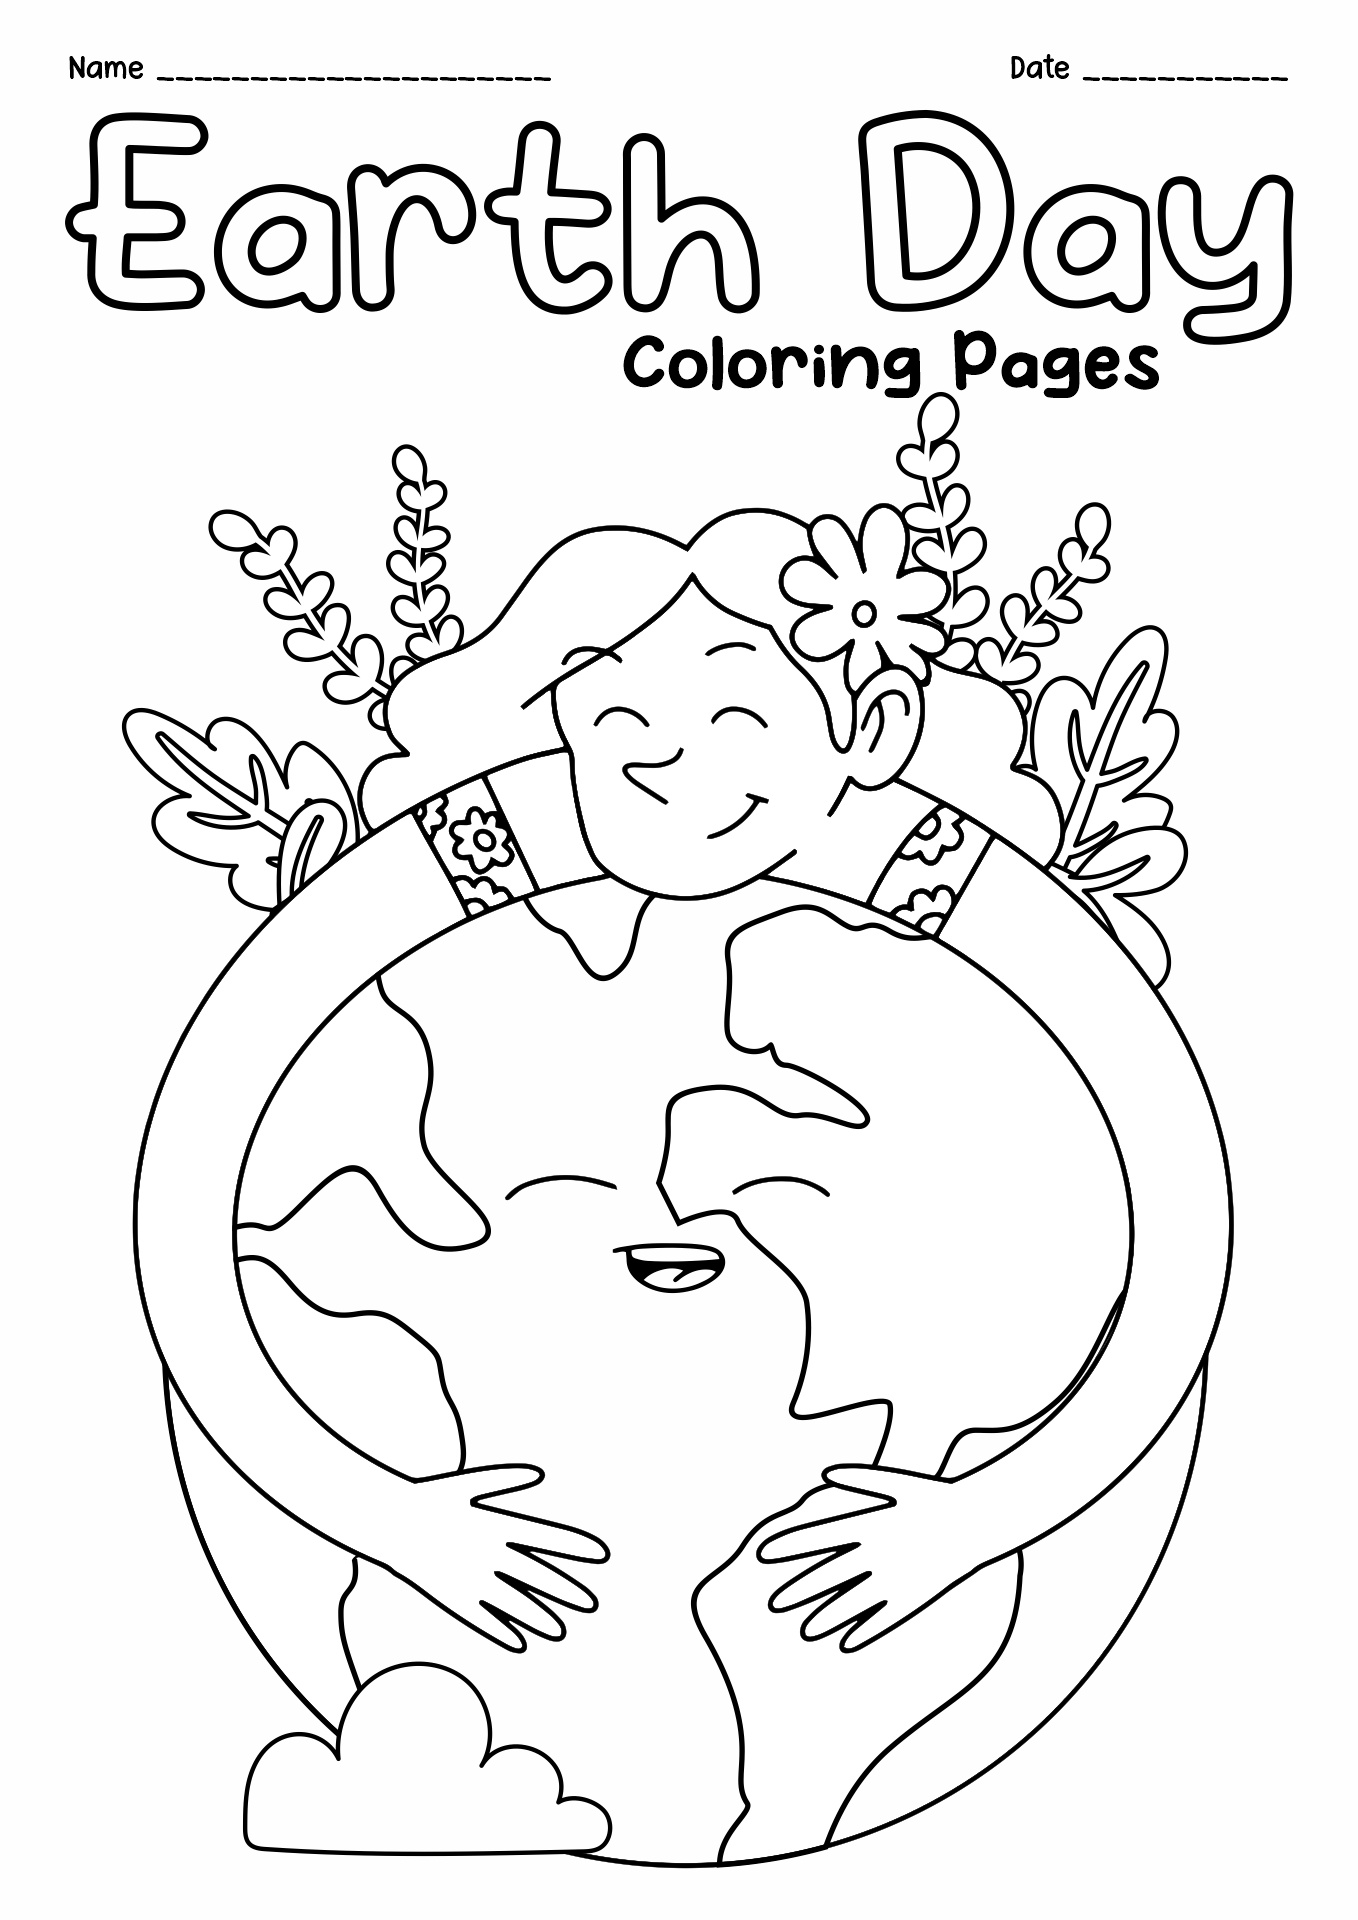 Free Earth Day Coloring Pages Image